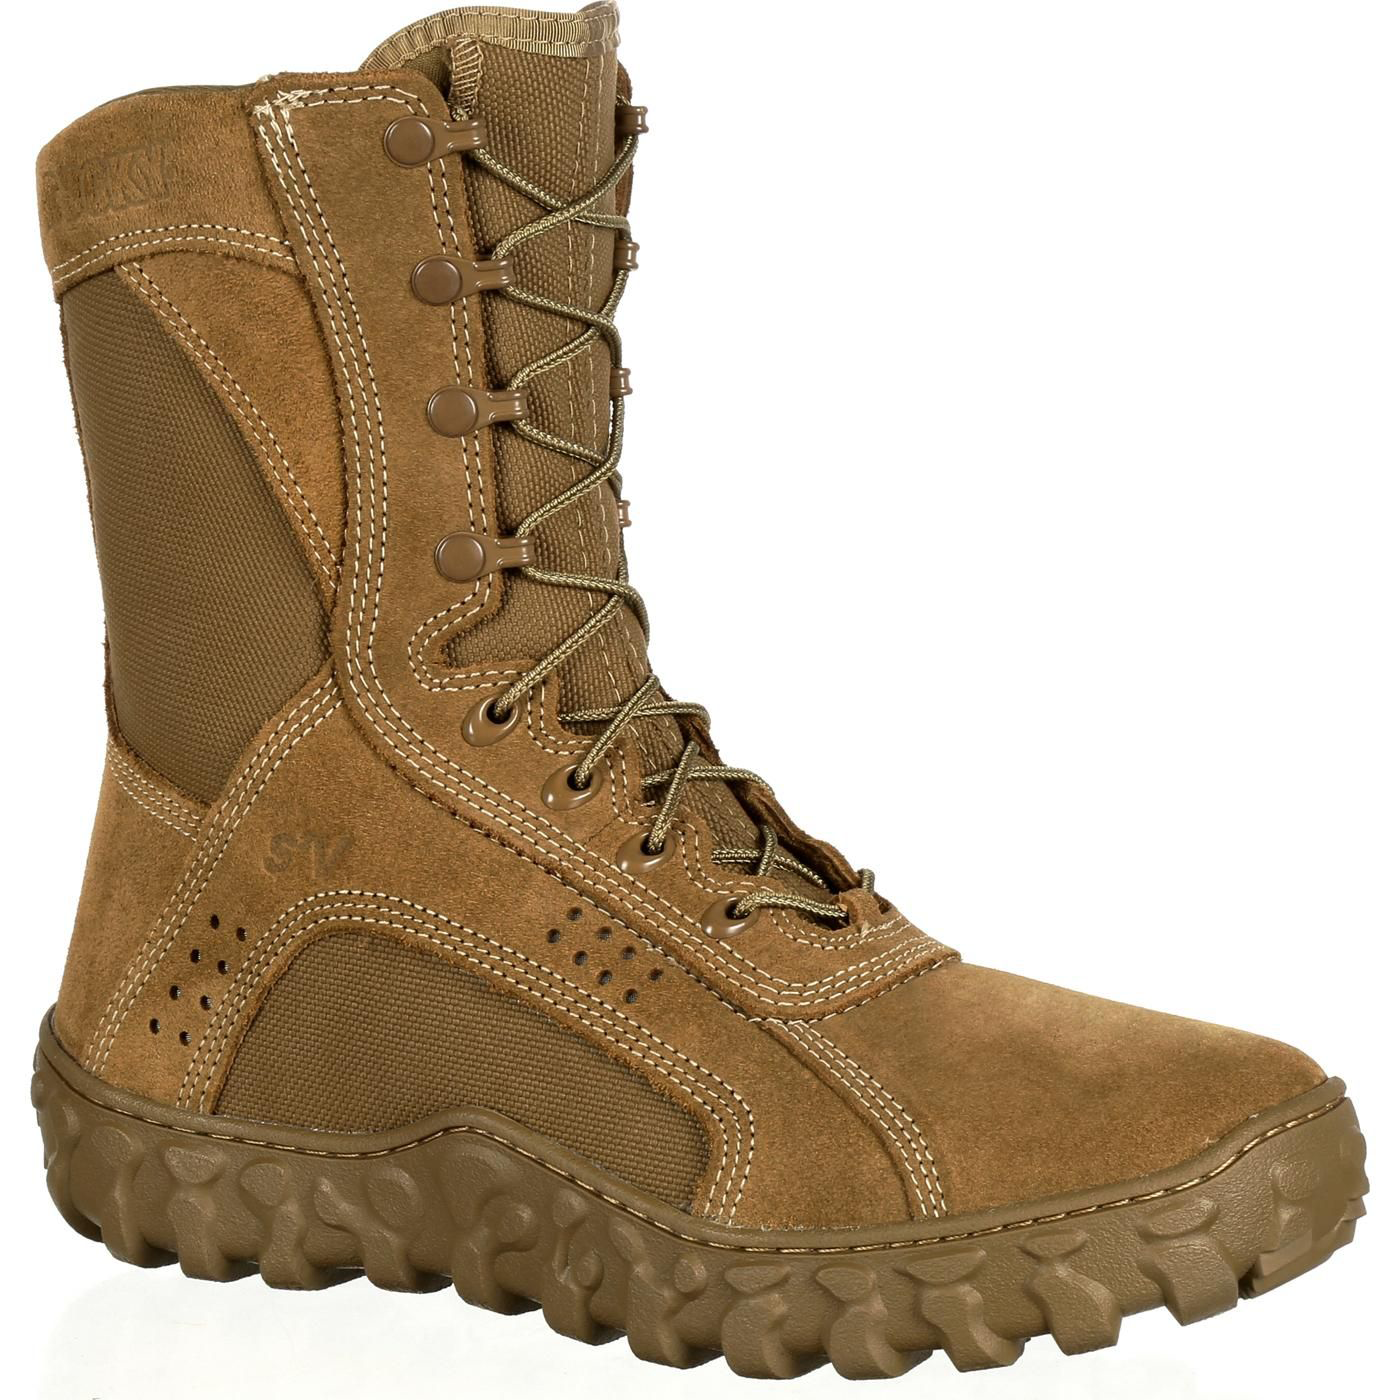 Rocky S2V Tactical Military Boots for Men - Coyote Brown - 11.5W